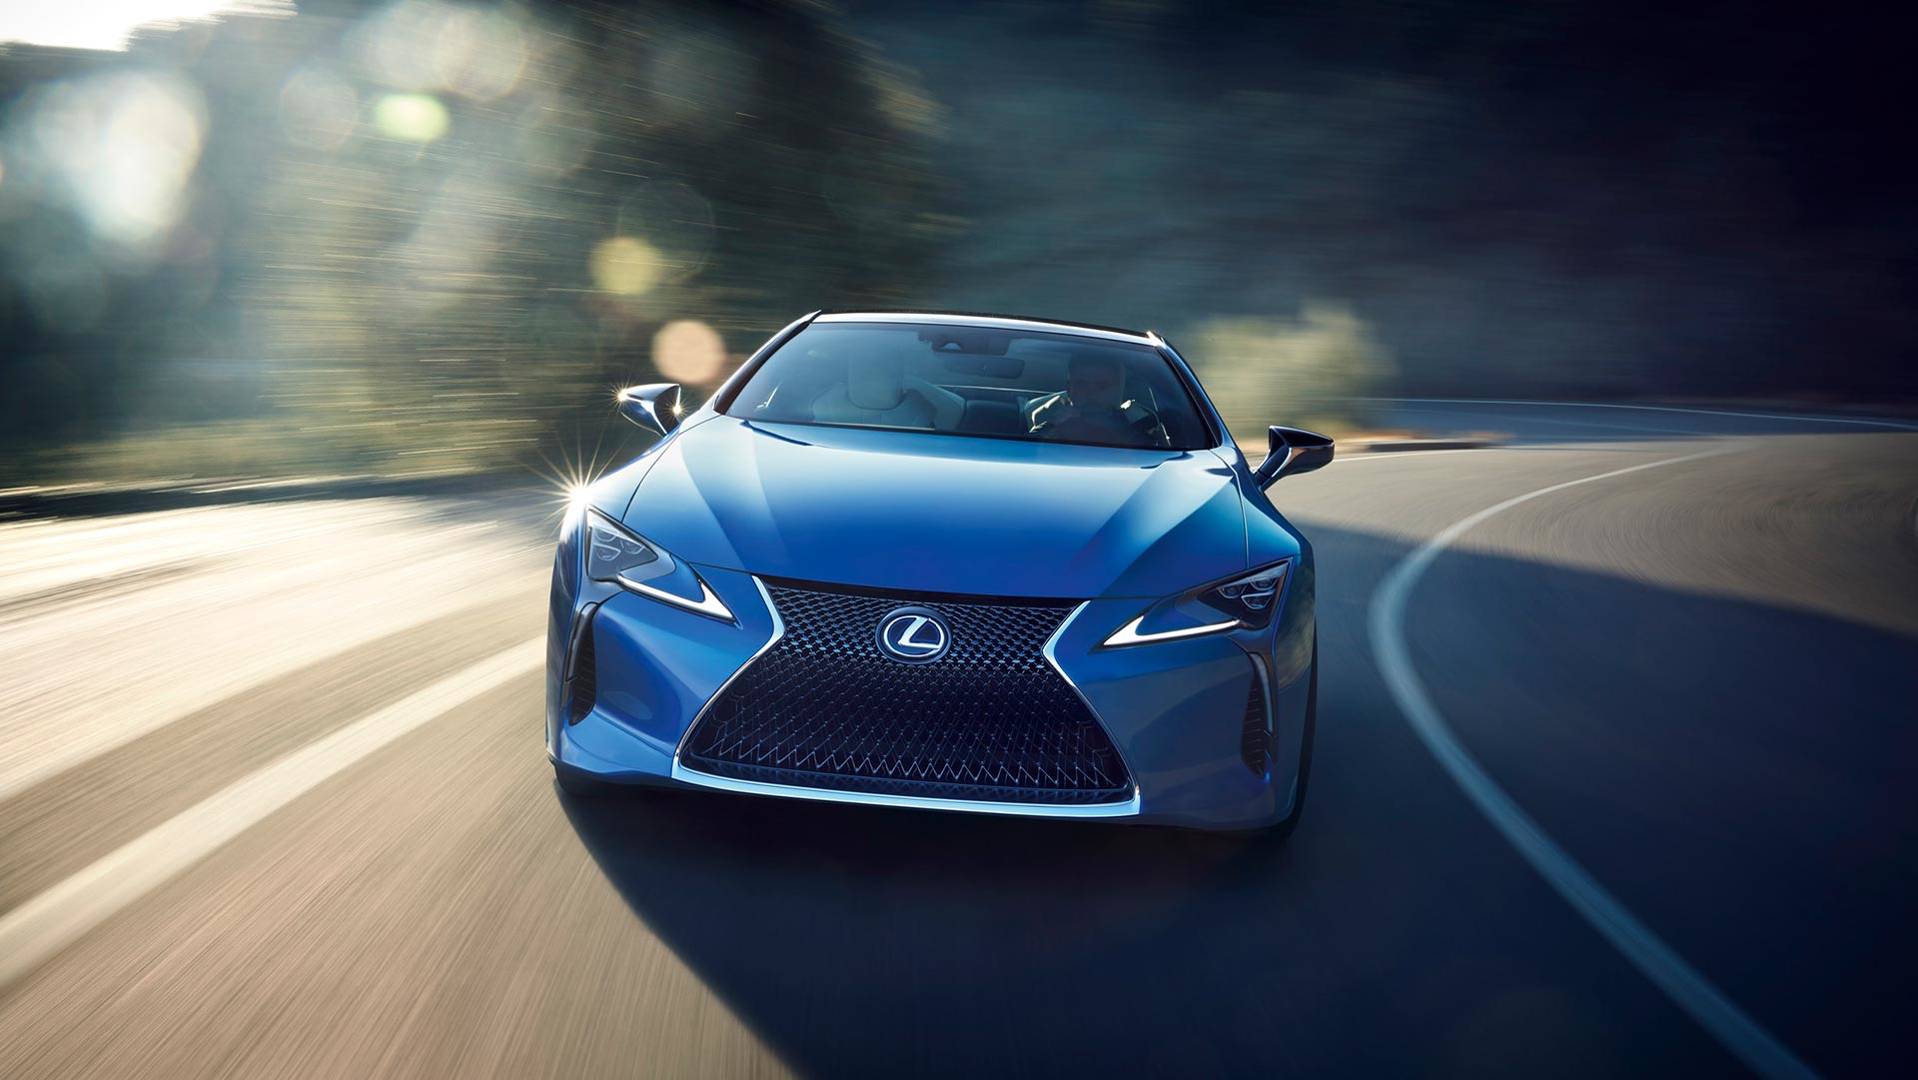 New Biturbo V8 Reportedly Gives Lexus LC F 621 HP